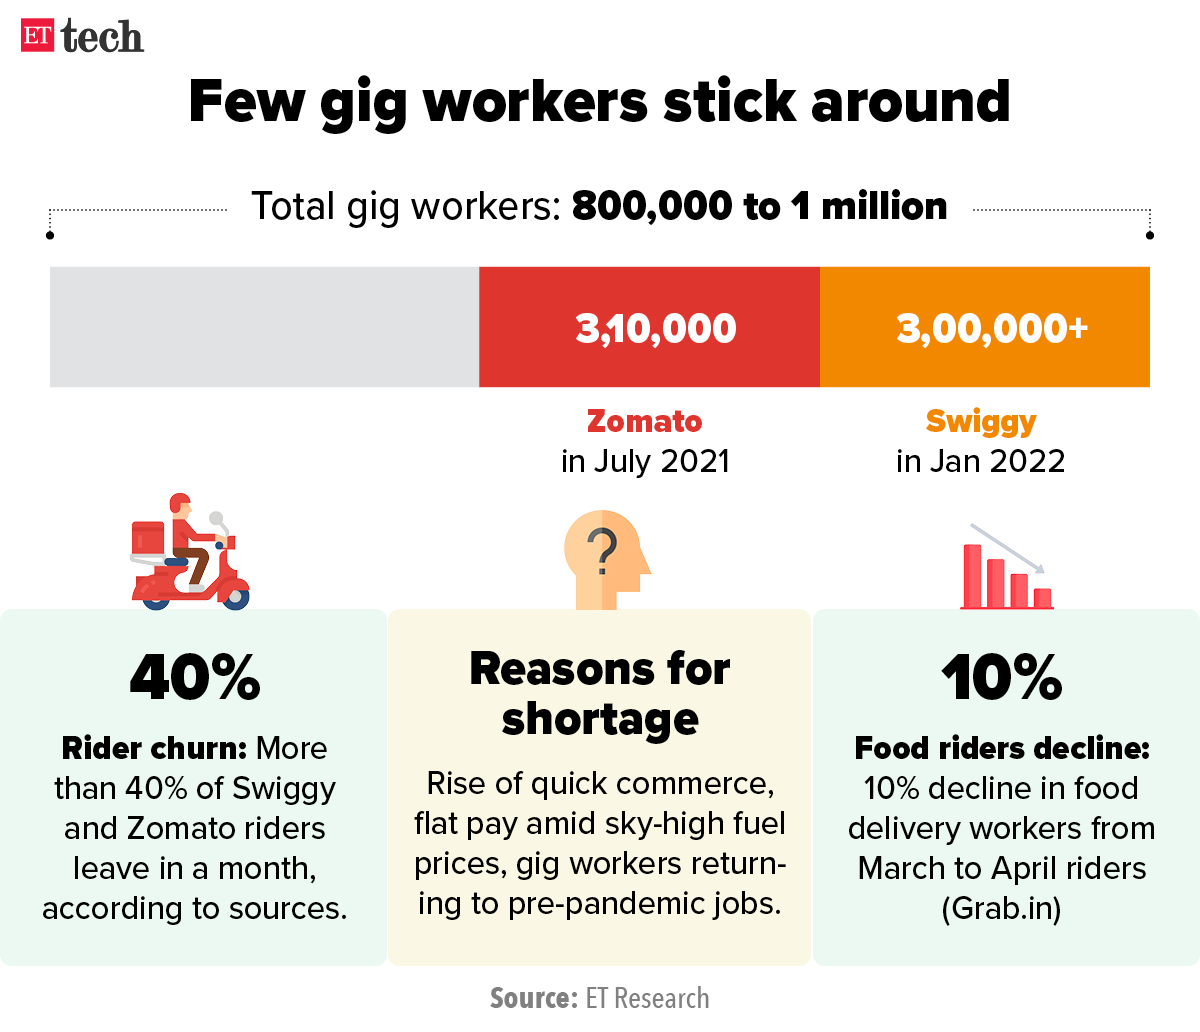 Few gig-workers remain around